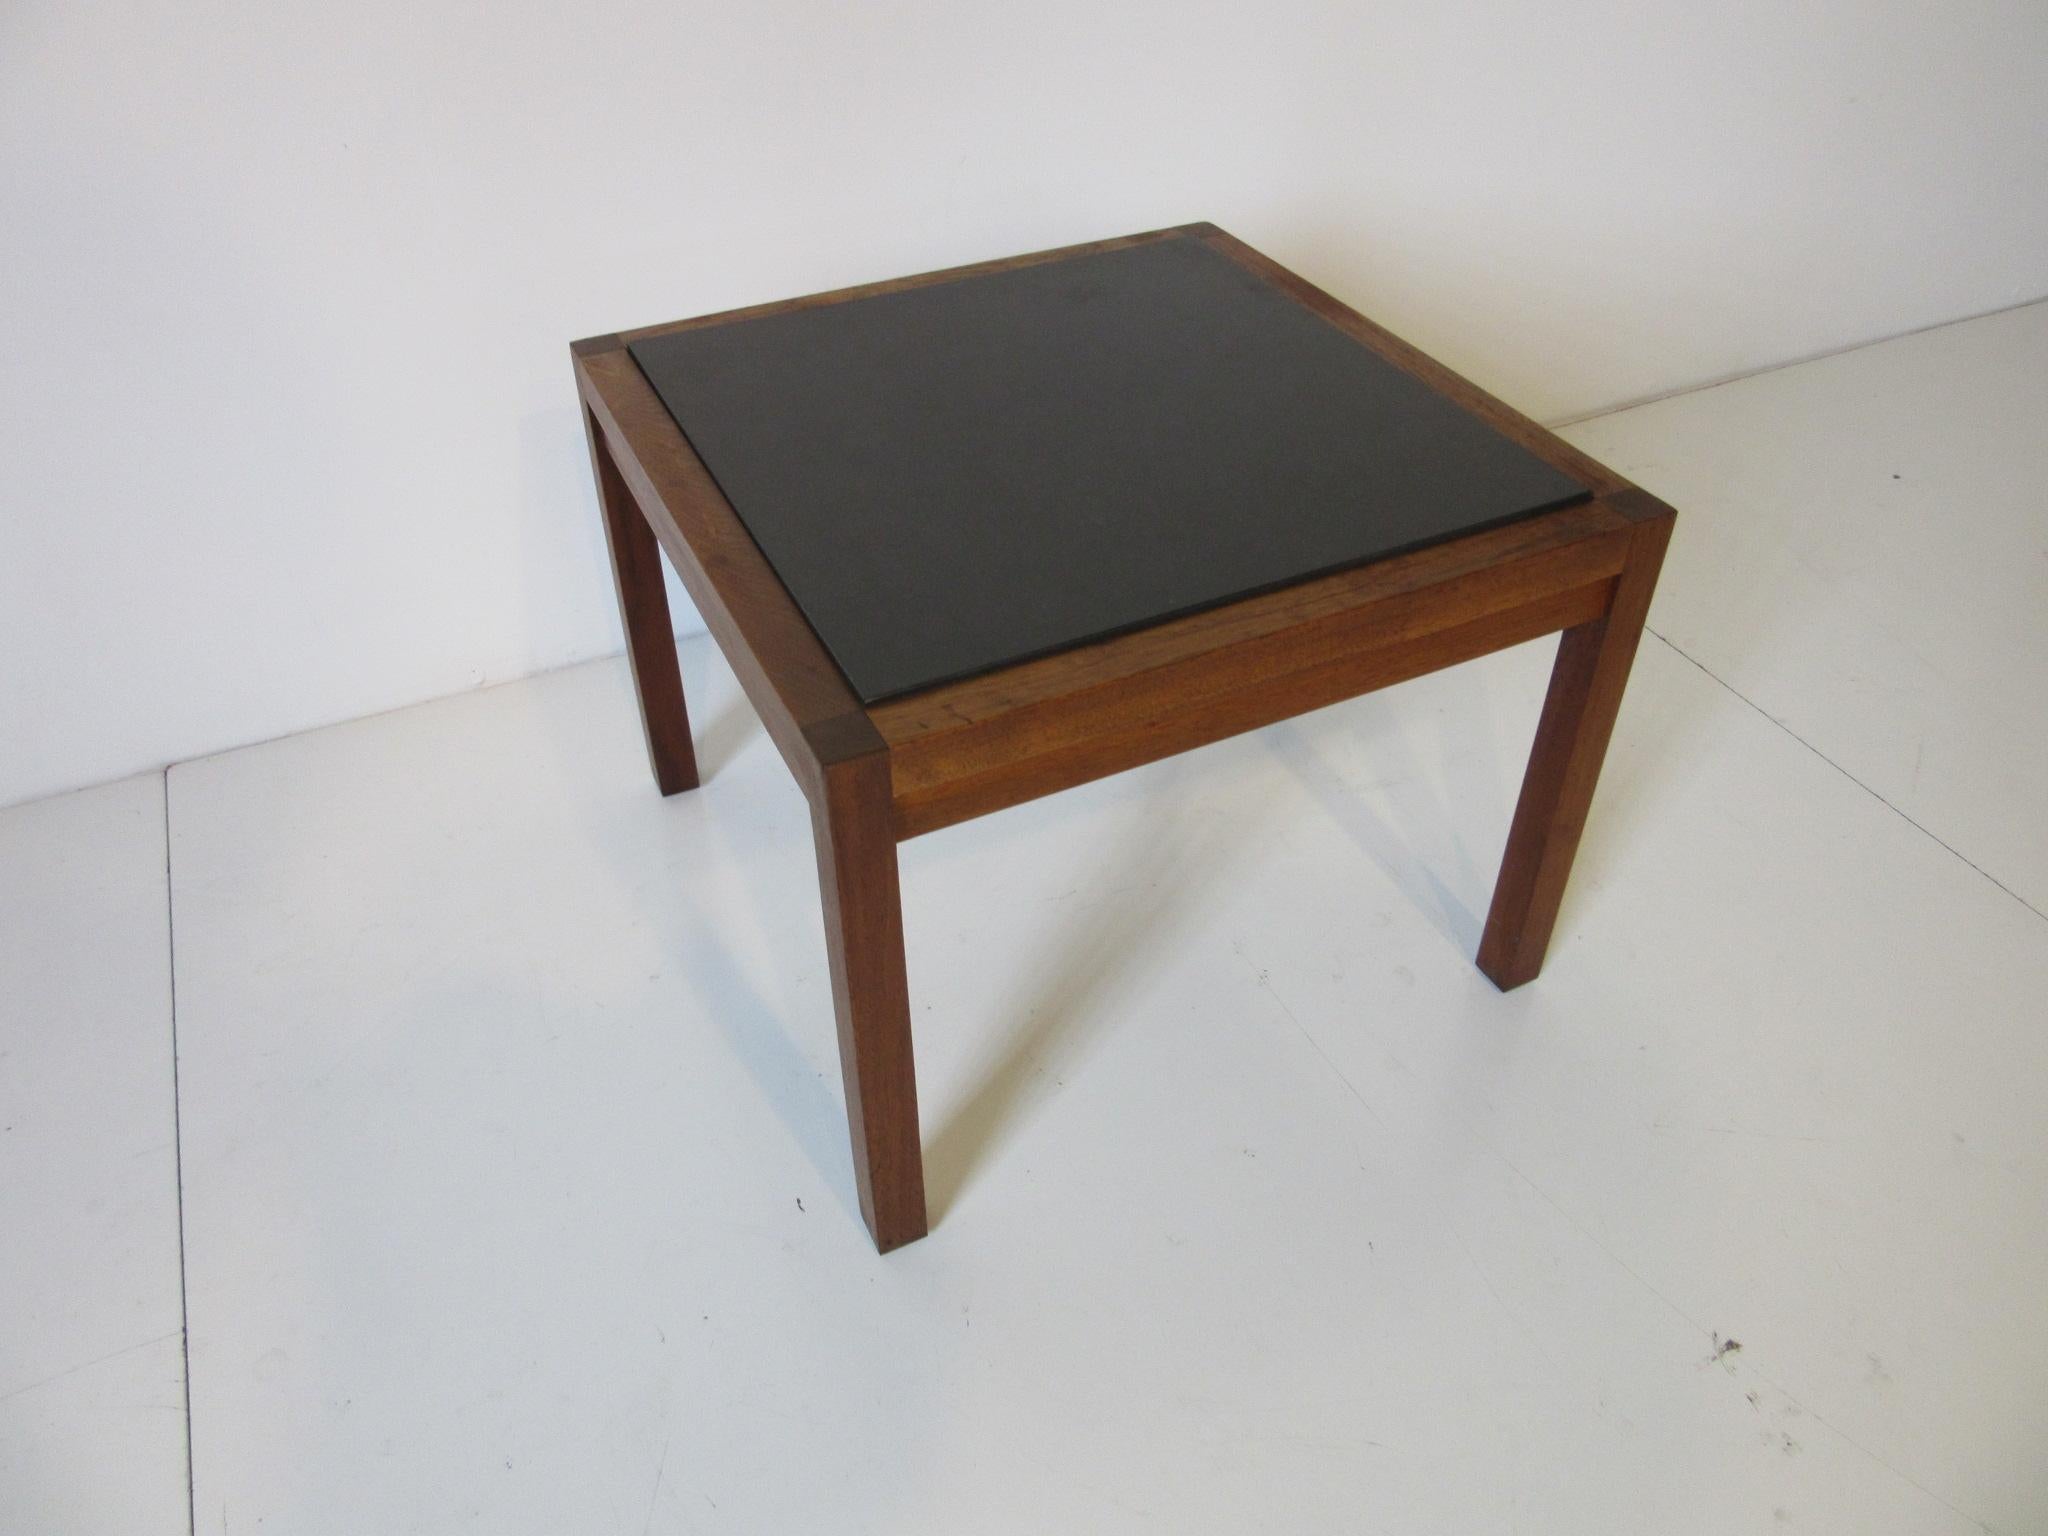 A Parsons styled walnut framed side table with a charcoal colored slate inserts in the style of Danish modern.